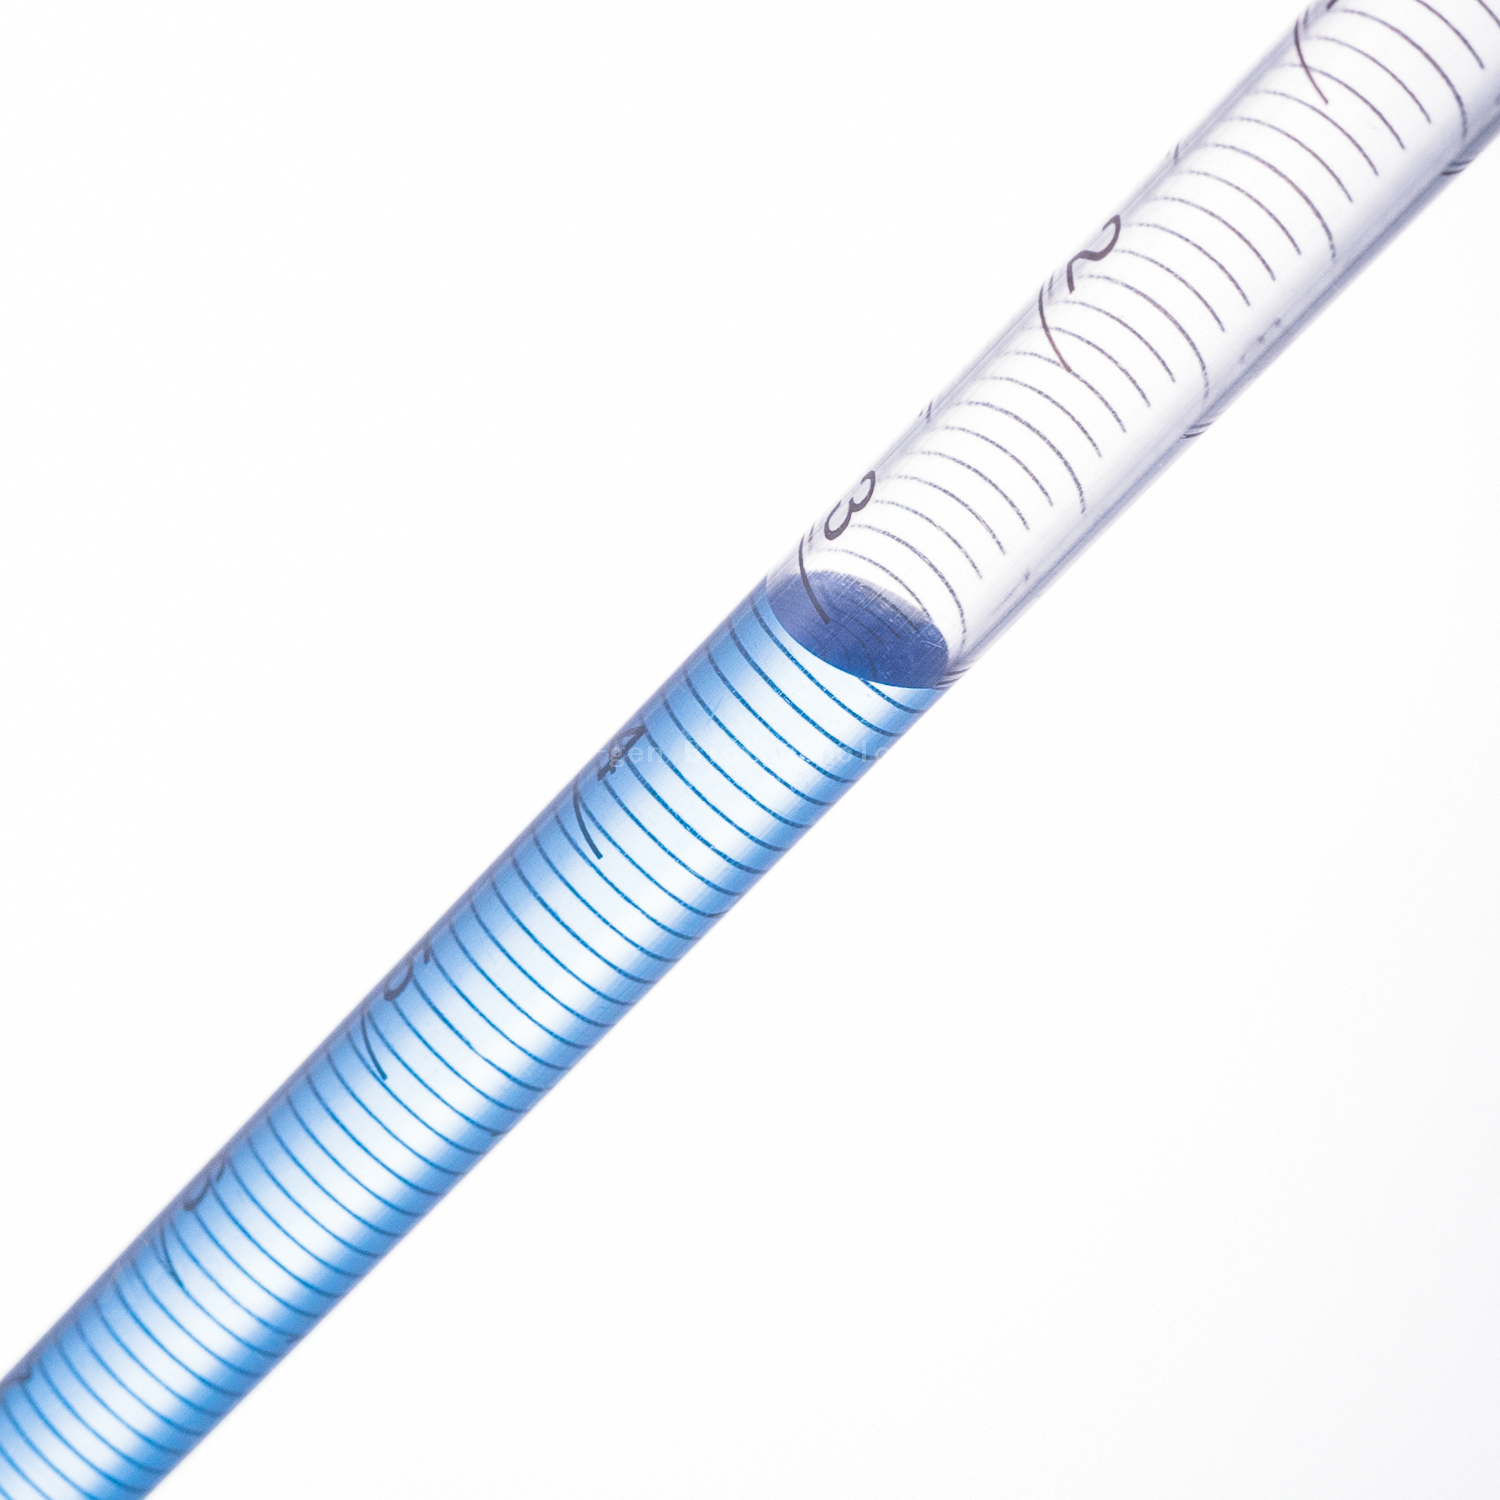 10ml Serological Pipette,sterile Customized in Individual Paper Bag Or Polybag